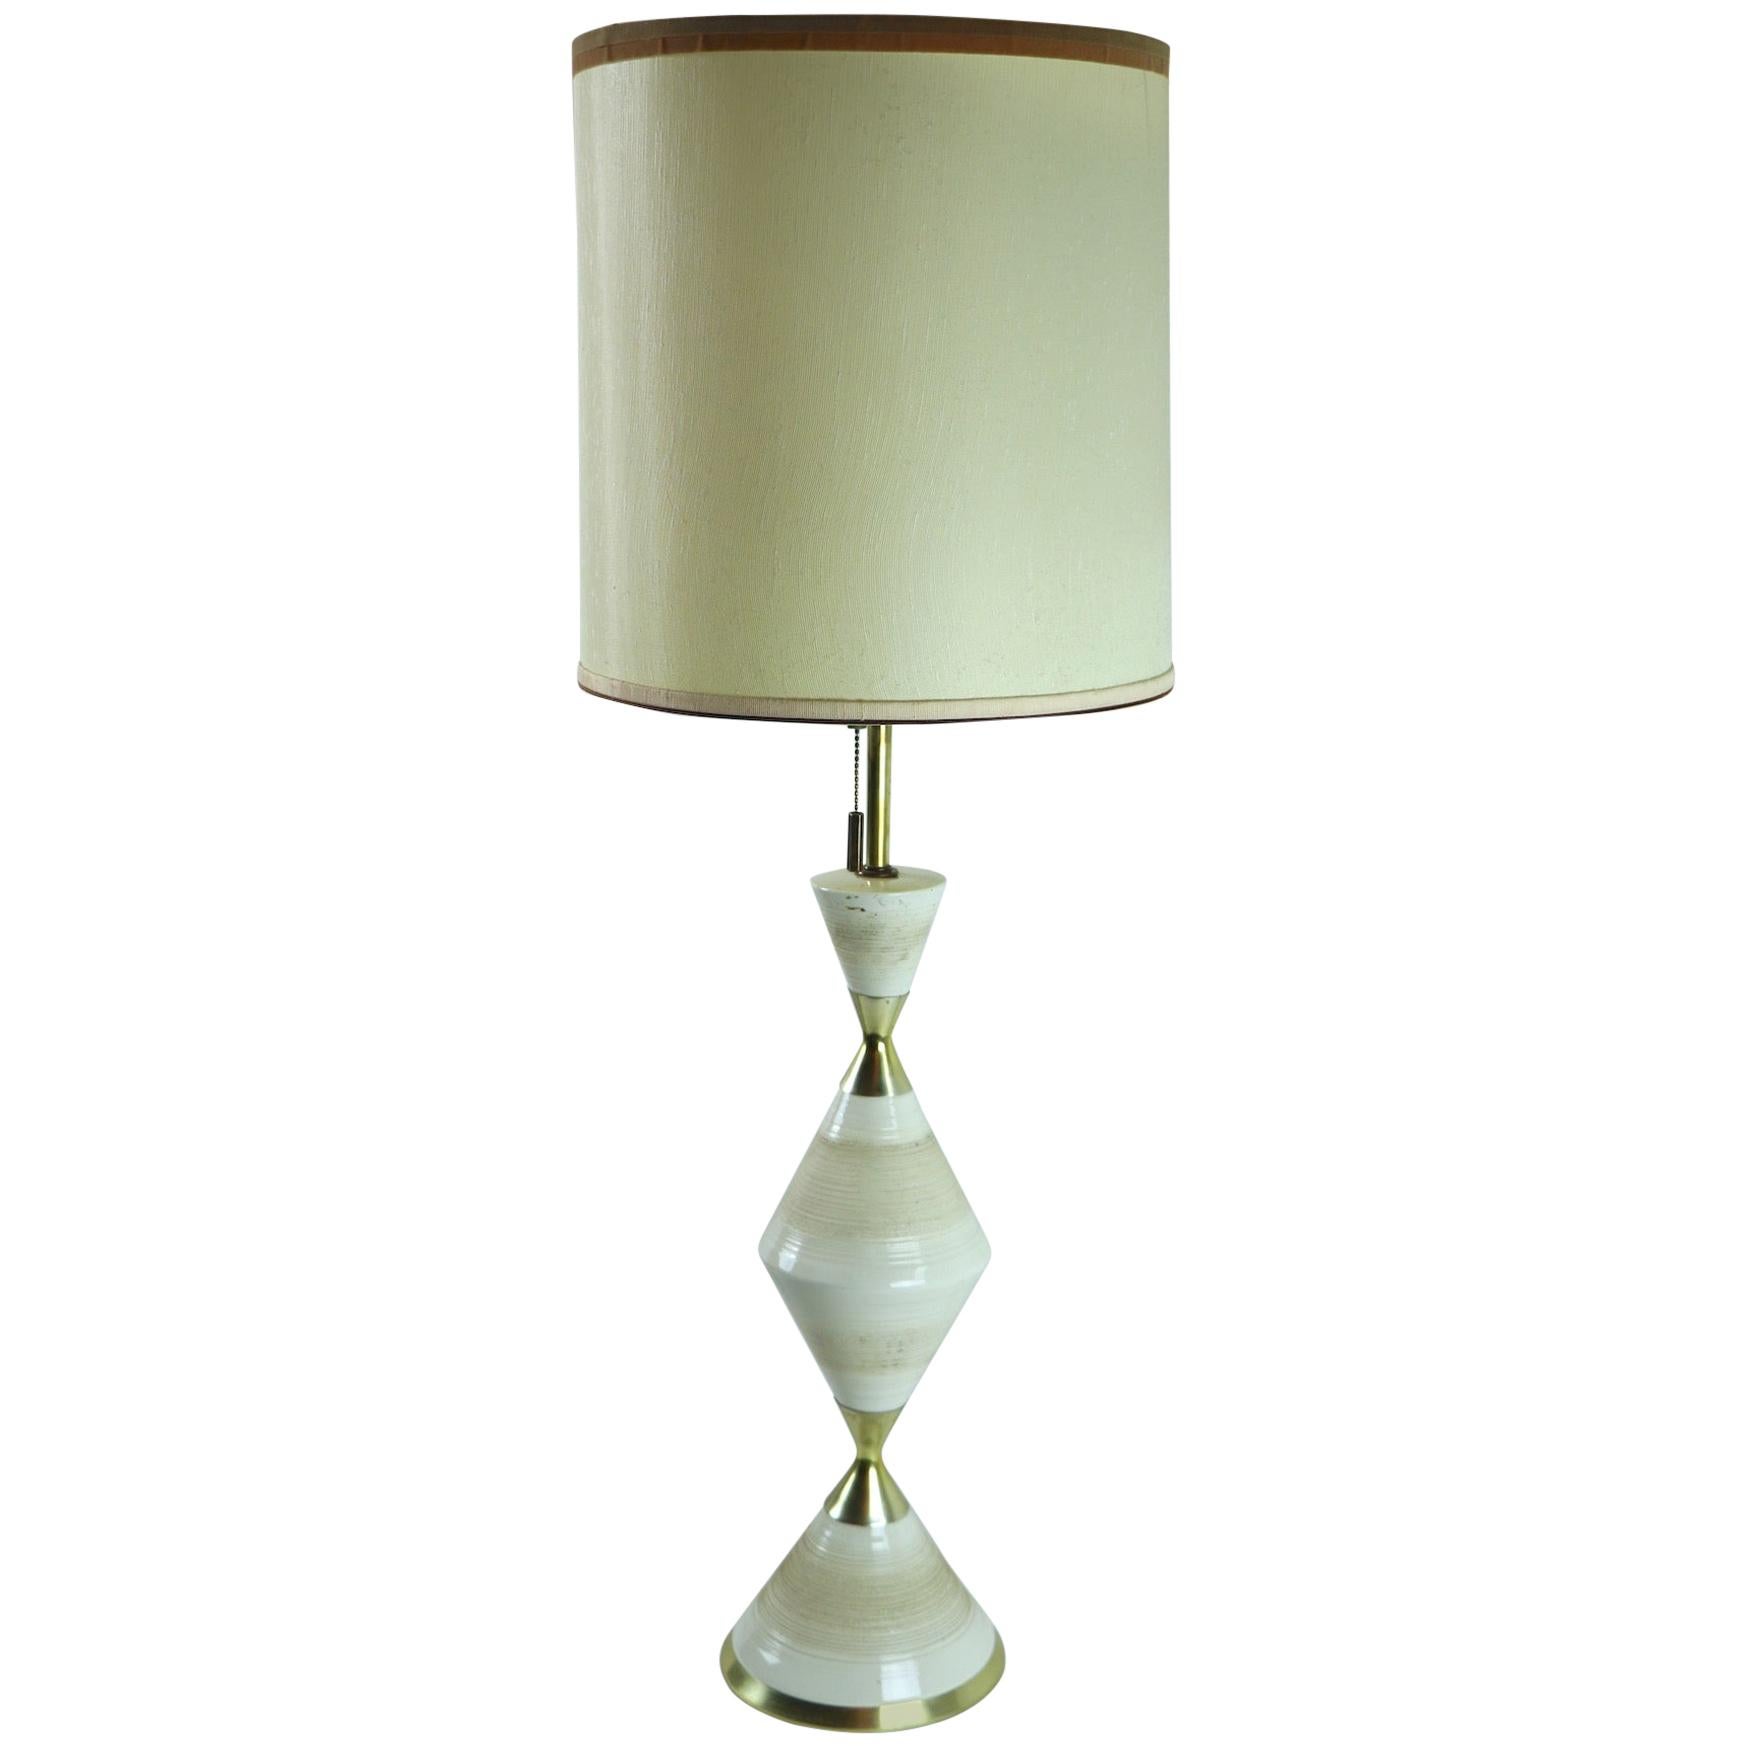 Ceramic and Brass Hourglass Table Lamp by Gerald Thurston